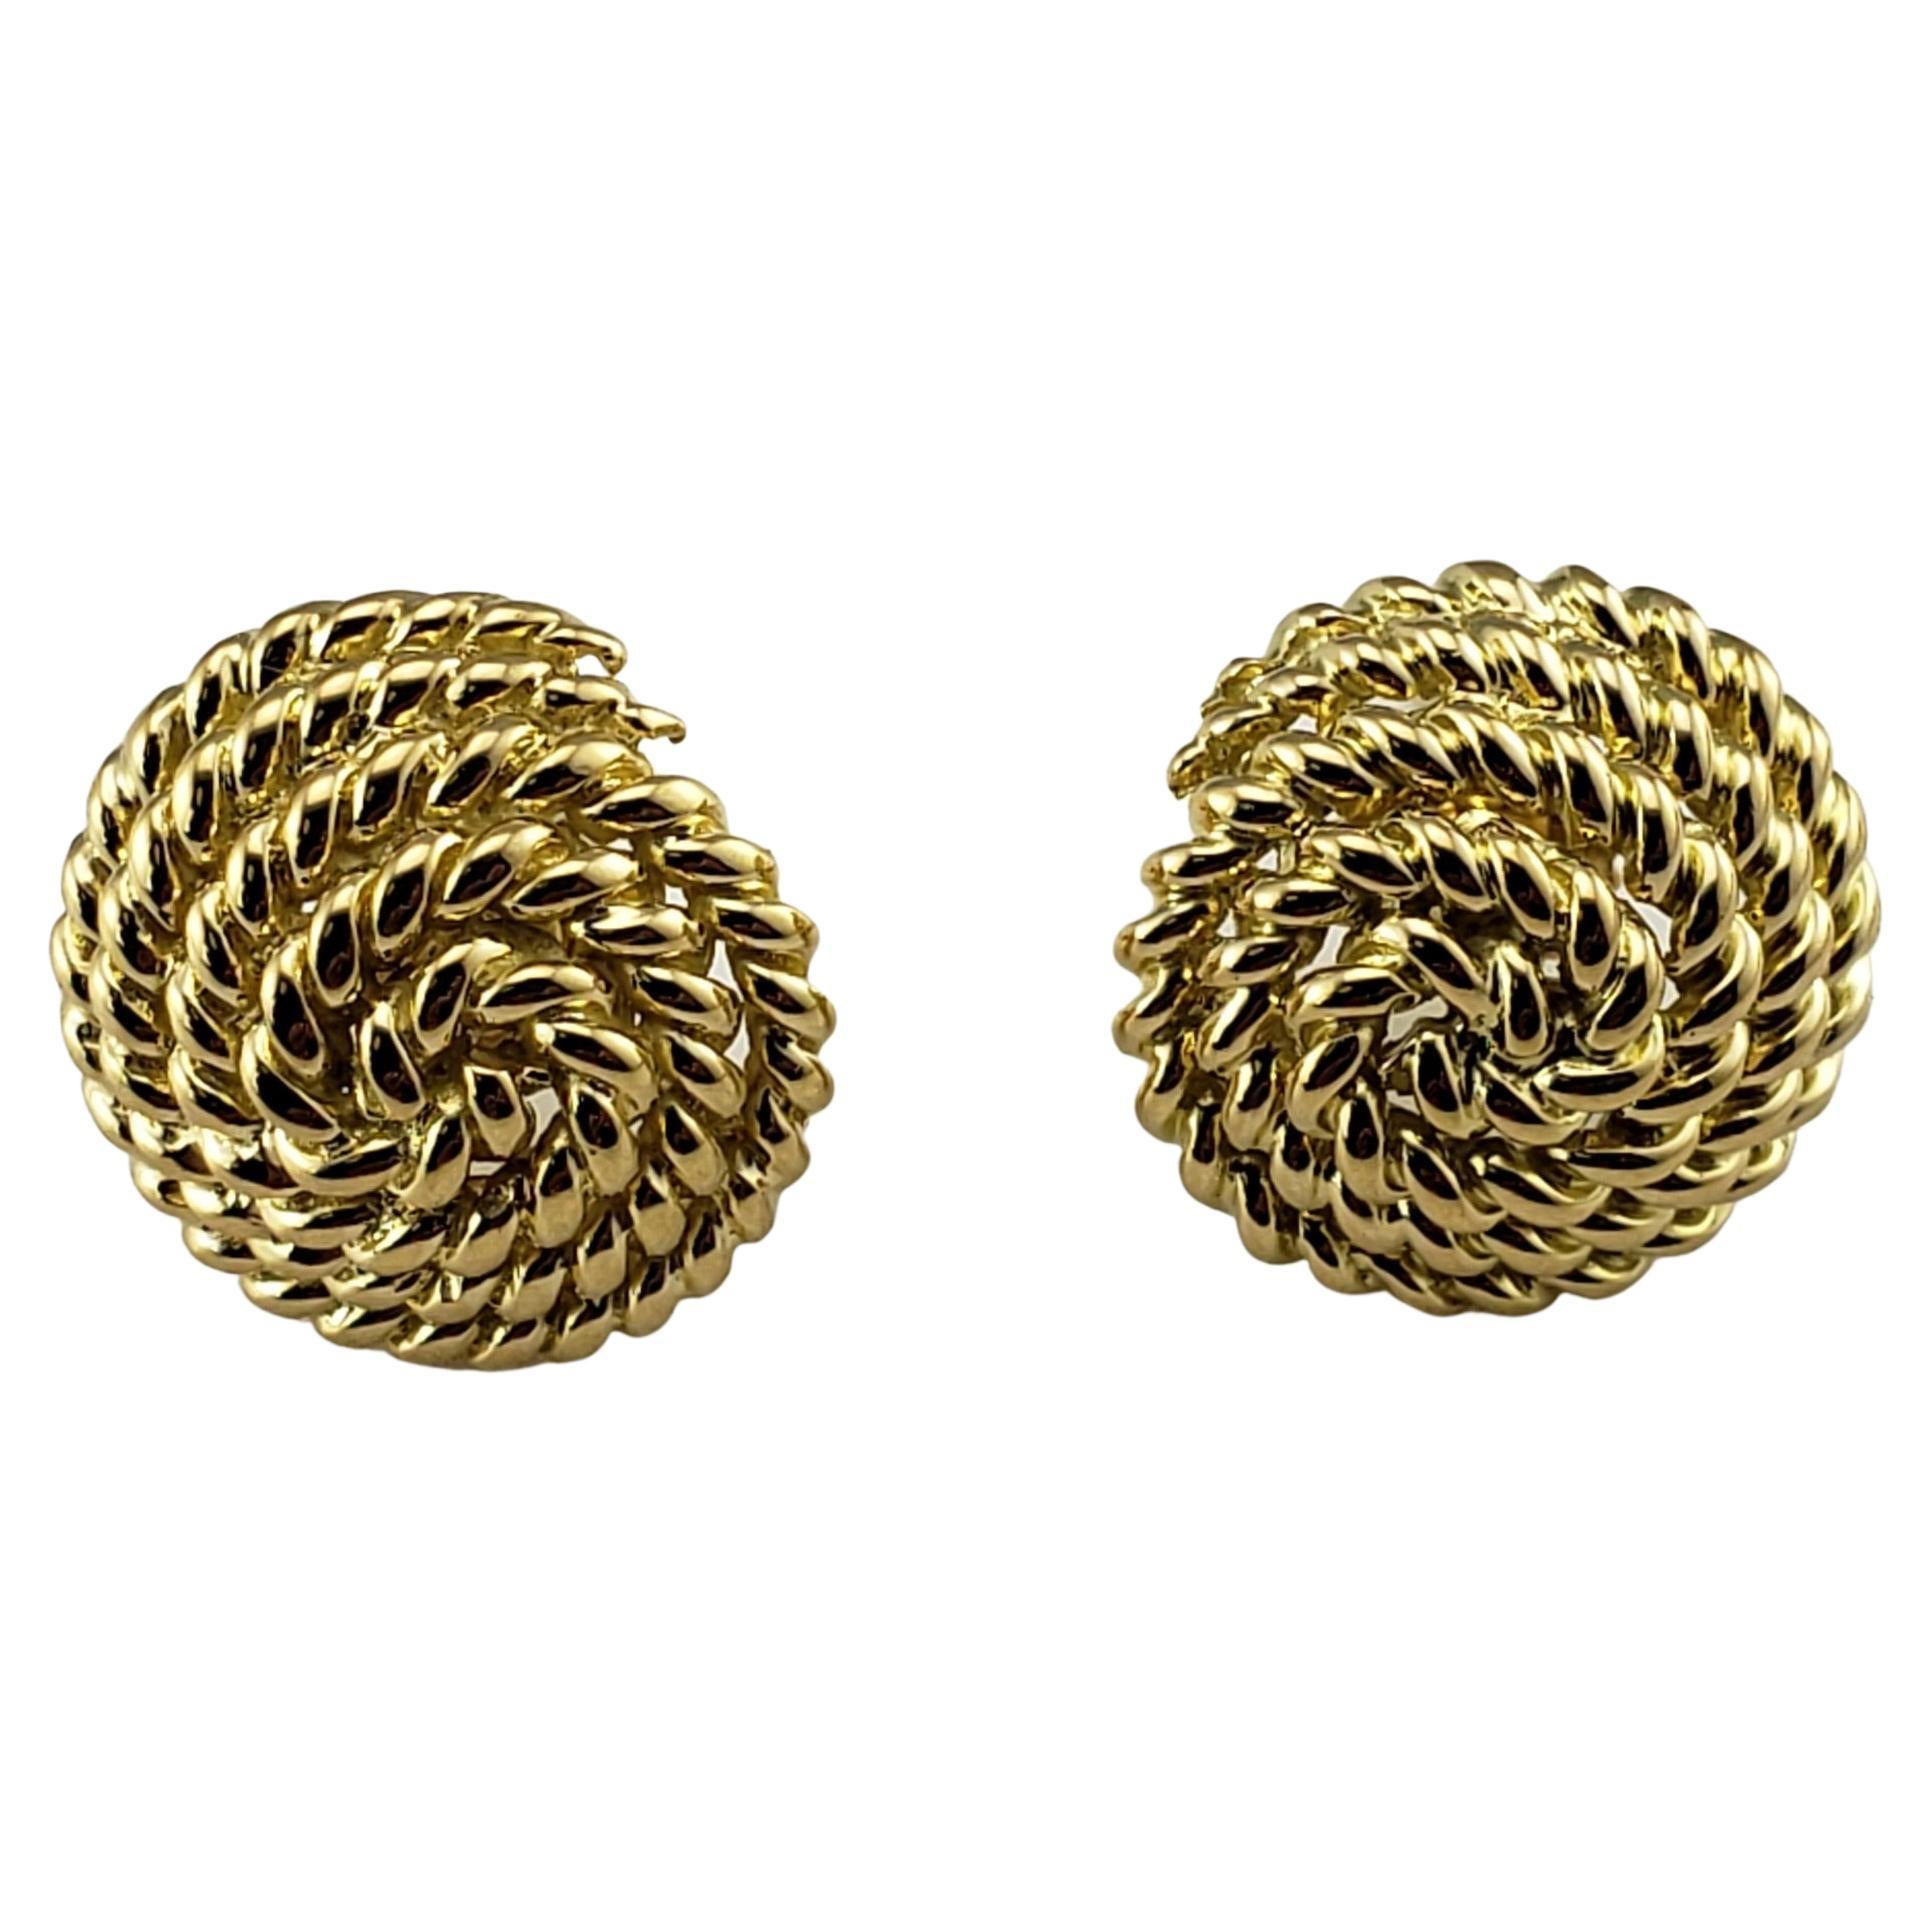 Vintage Tiffany & Co. 18 Karat Yellow Gold Coiled Rope Earrings For Sale